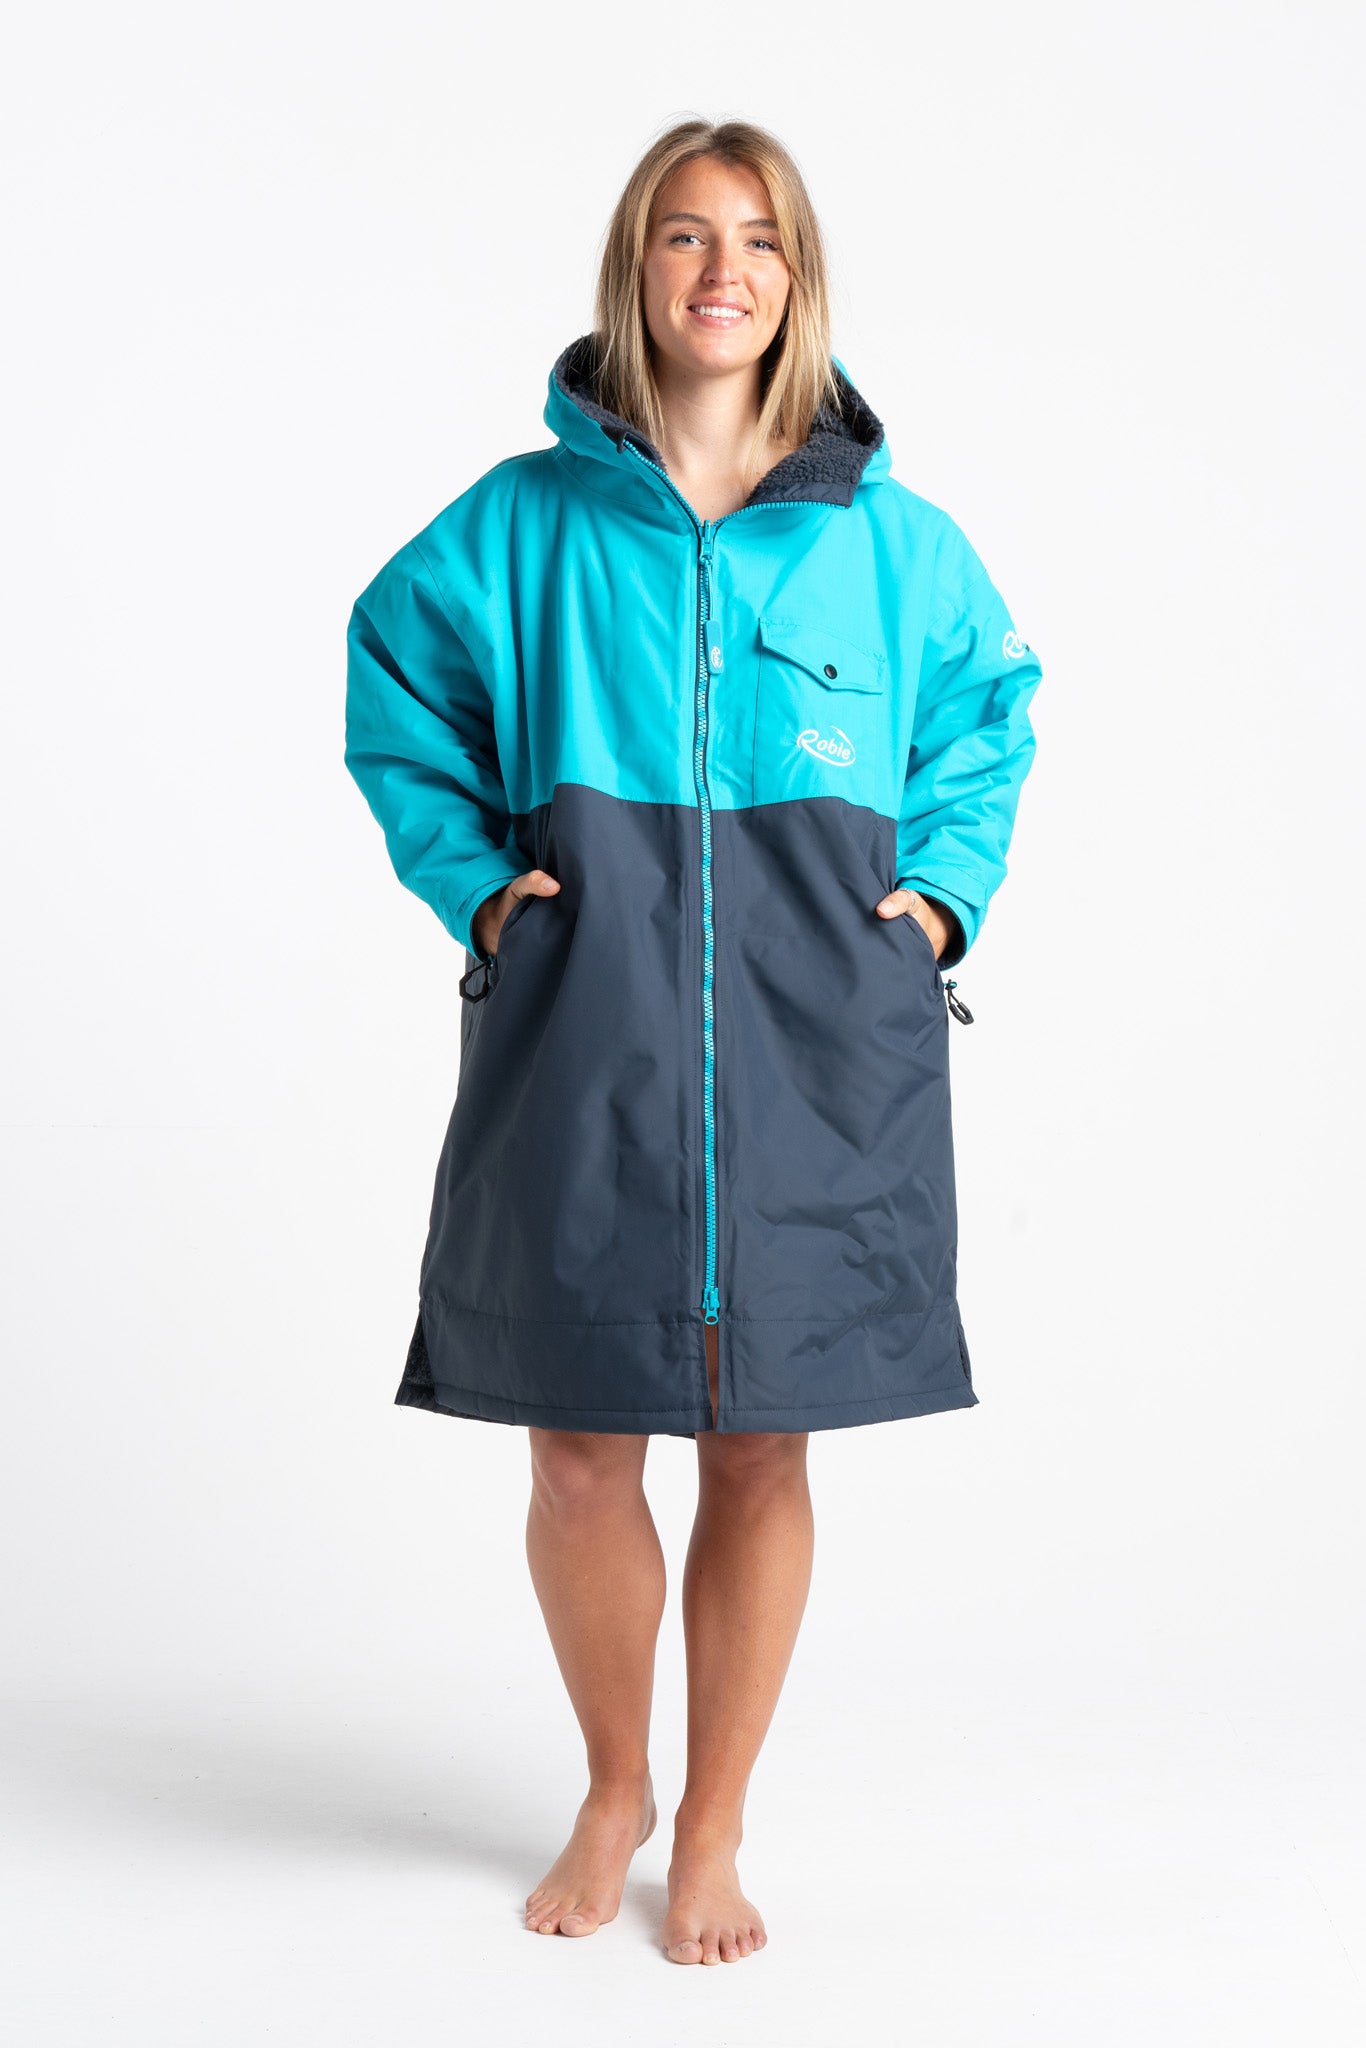 robie-robes-dry-series-changing-robe-waterproof-preorder-product-blacksheepsurfco-galway-ireland-india-ink-blue-atoll-small